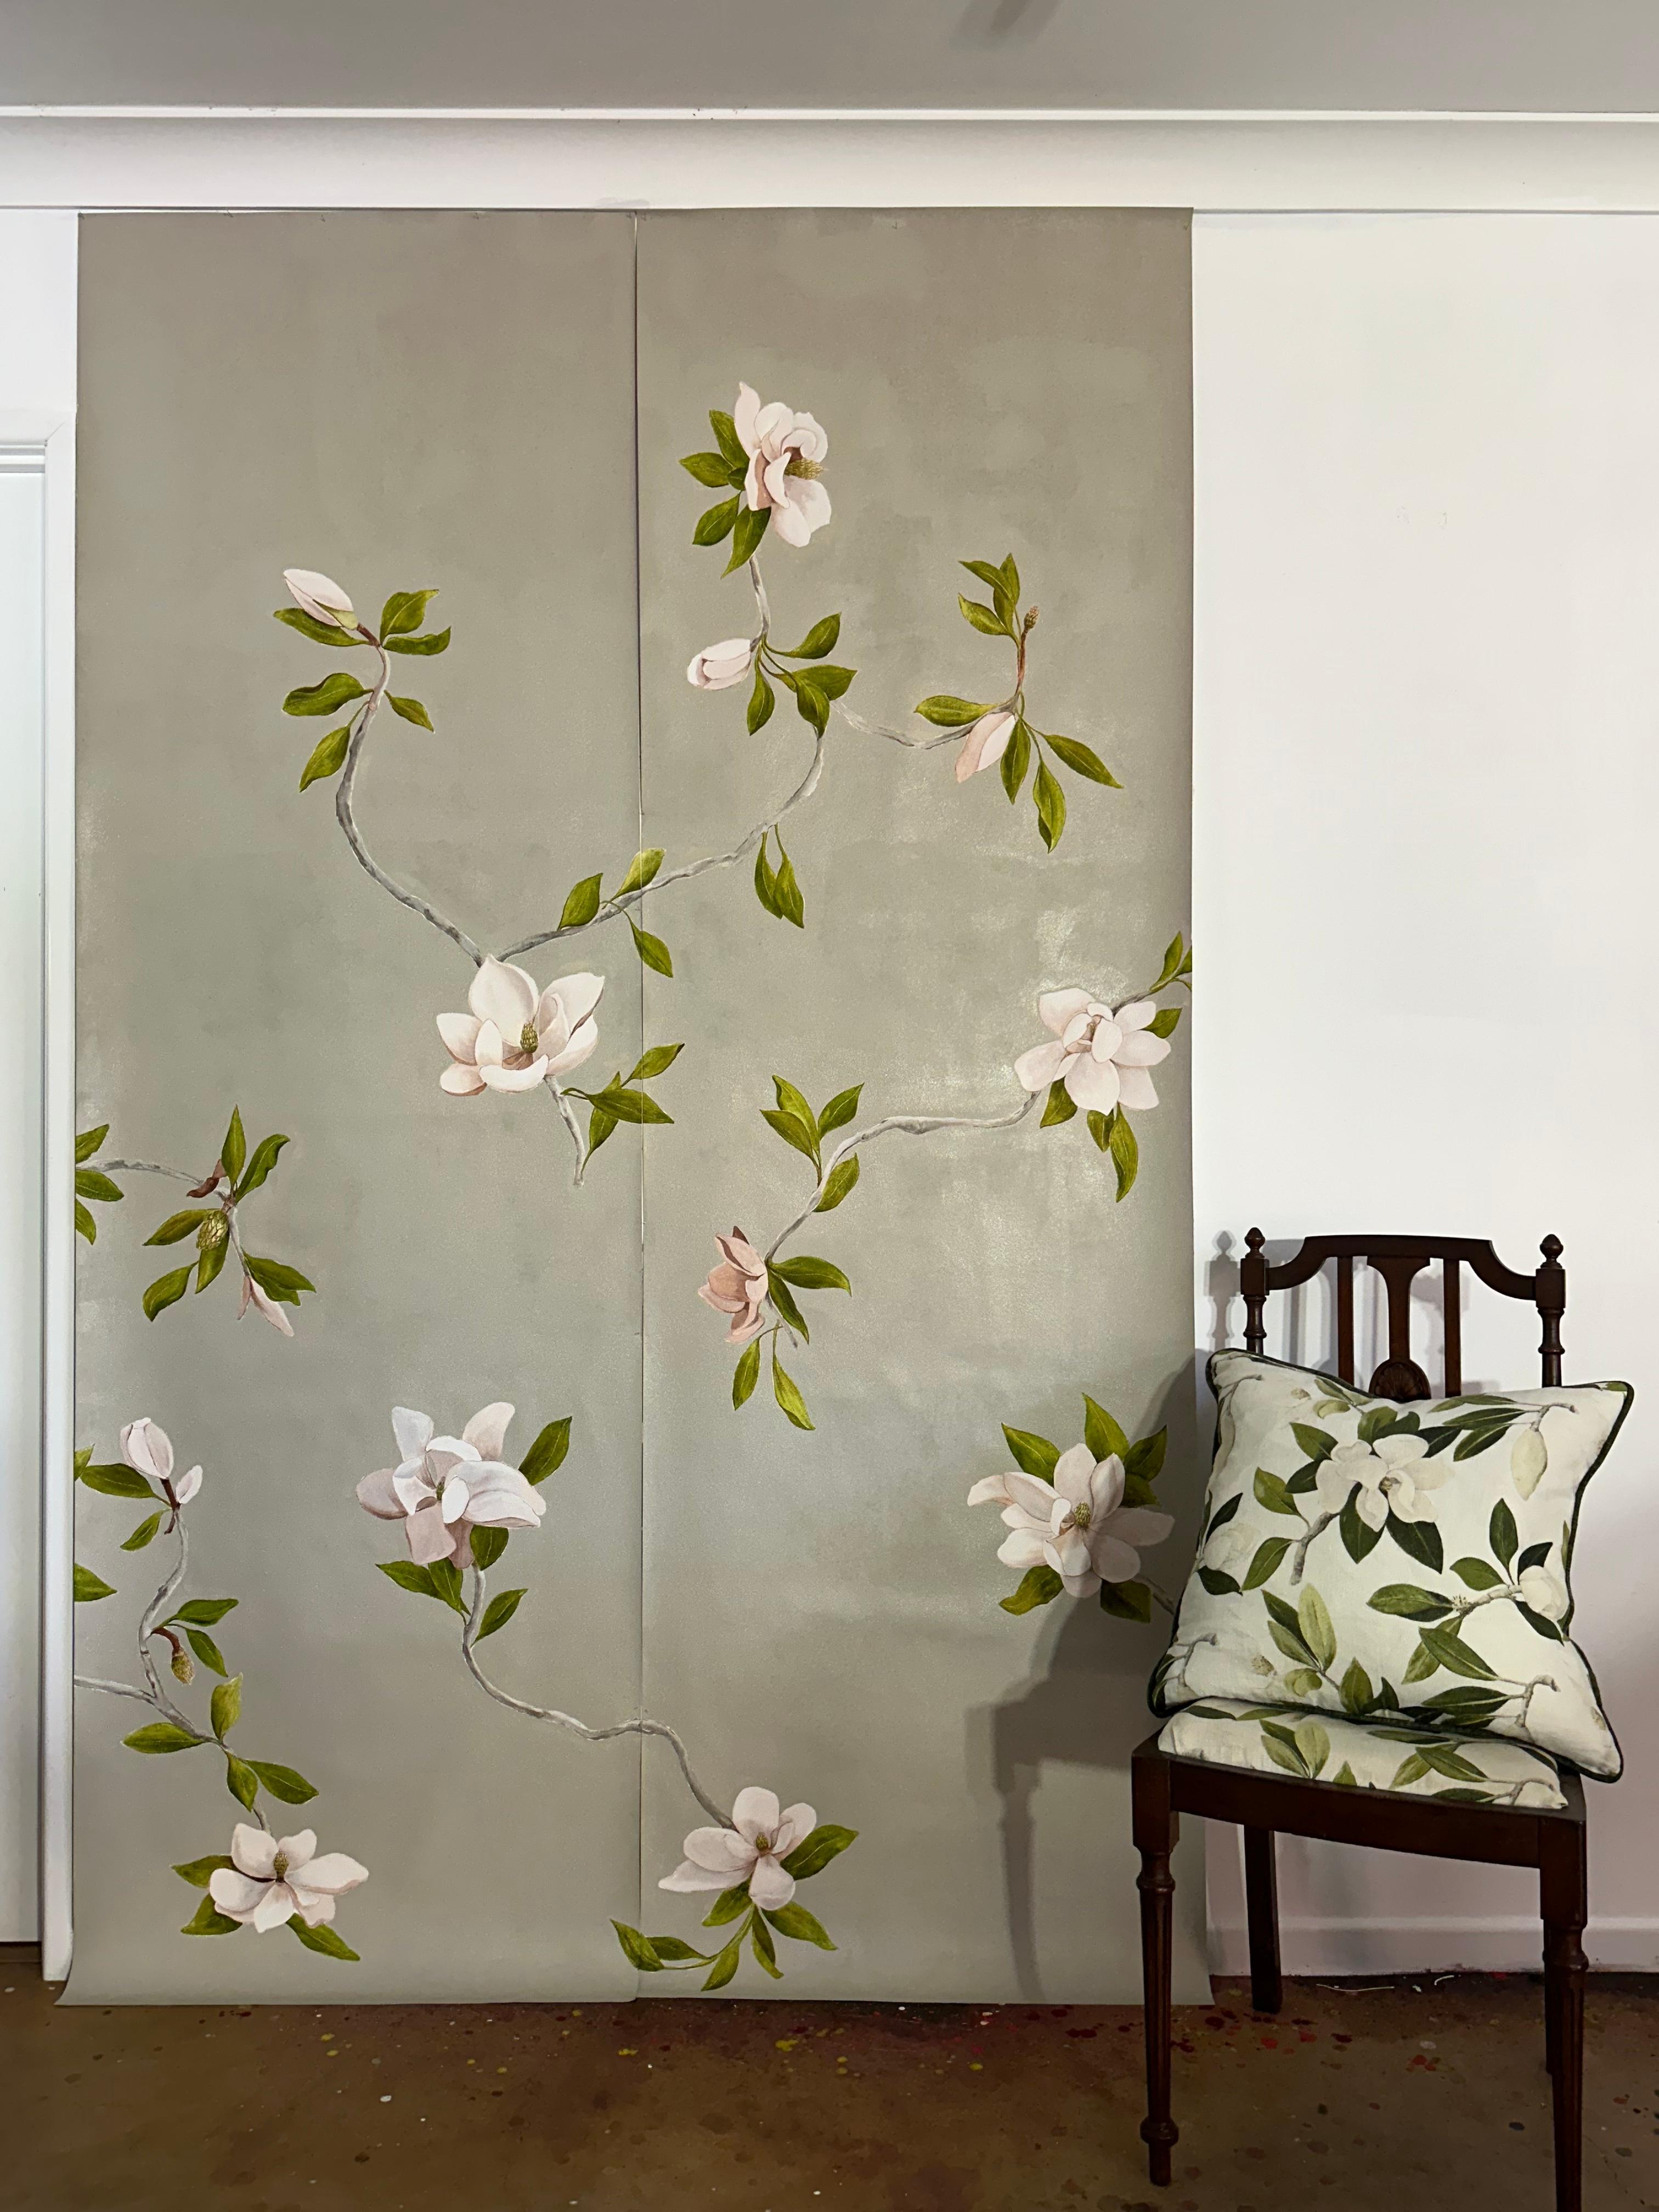 Beige Magnolia hand painted wallpaper panels in traditional botanical style rather than a stylised chinoiserie. Black Magnolia hand painted wallpaper panels show two drops of 8 from the full botanical design.
Each wallpaper panel is a work of fine